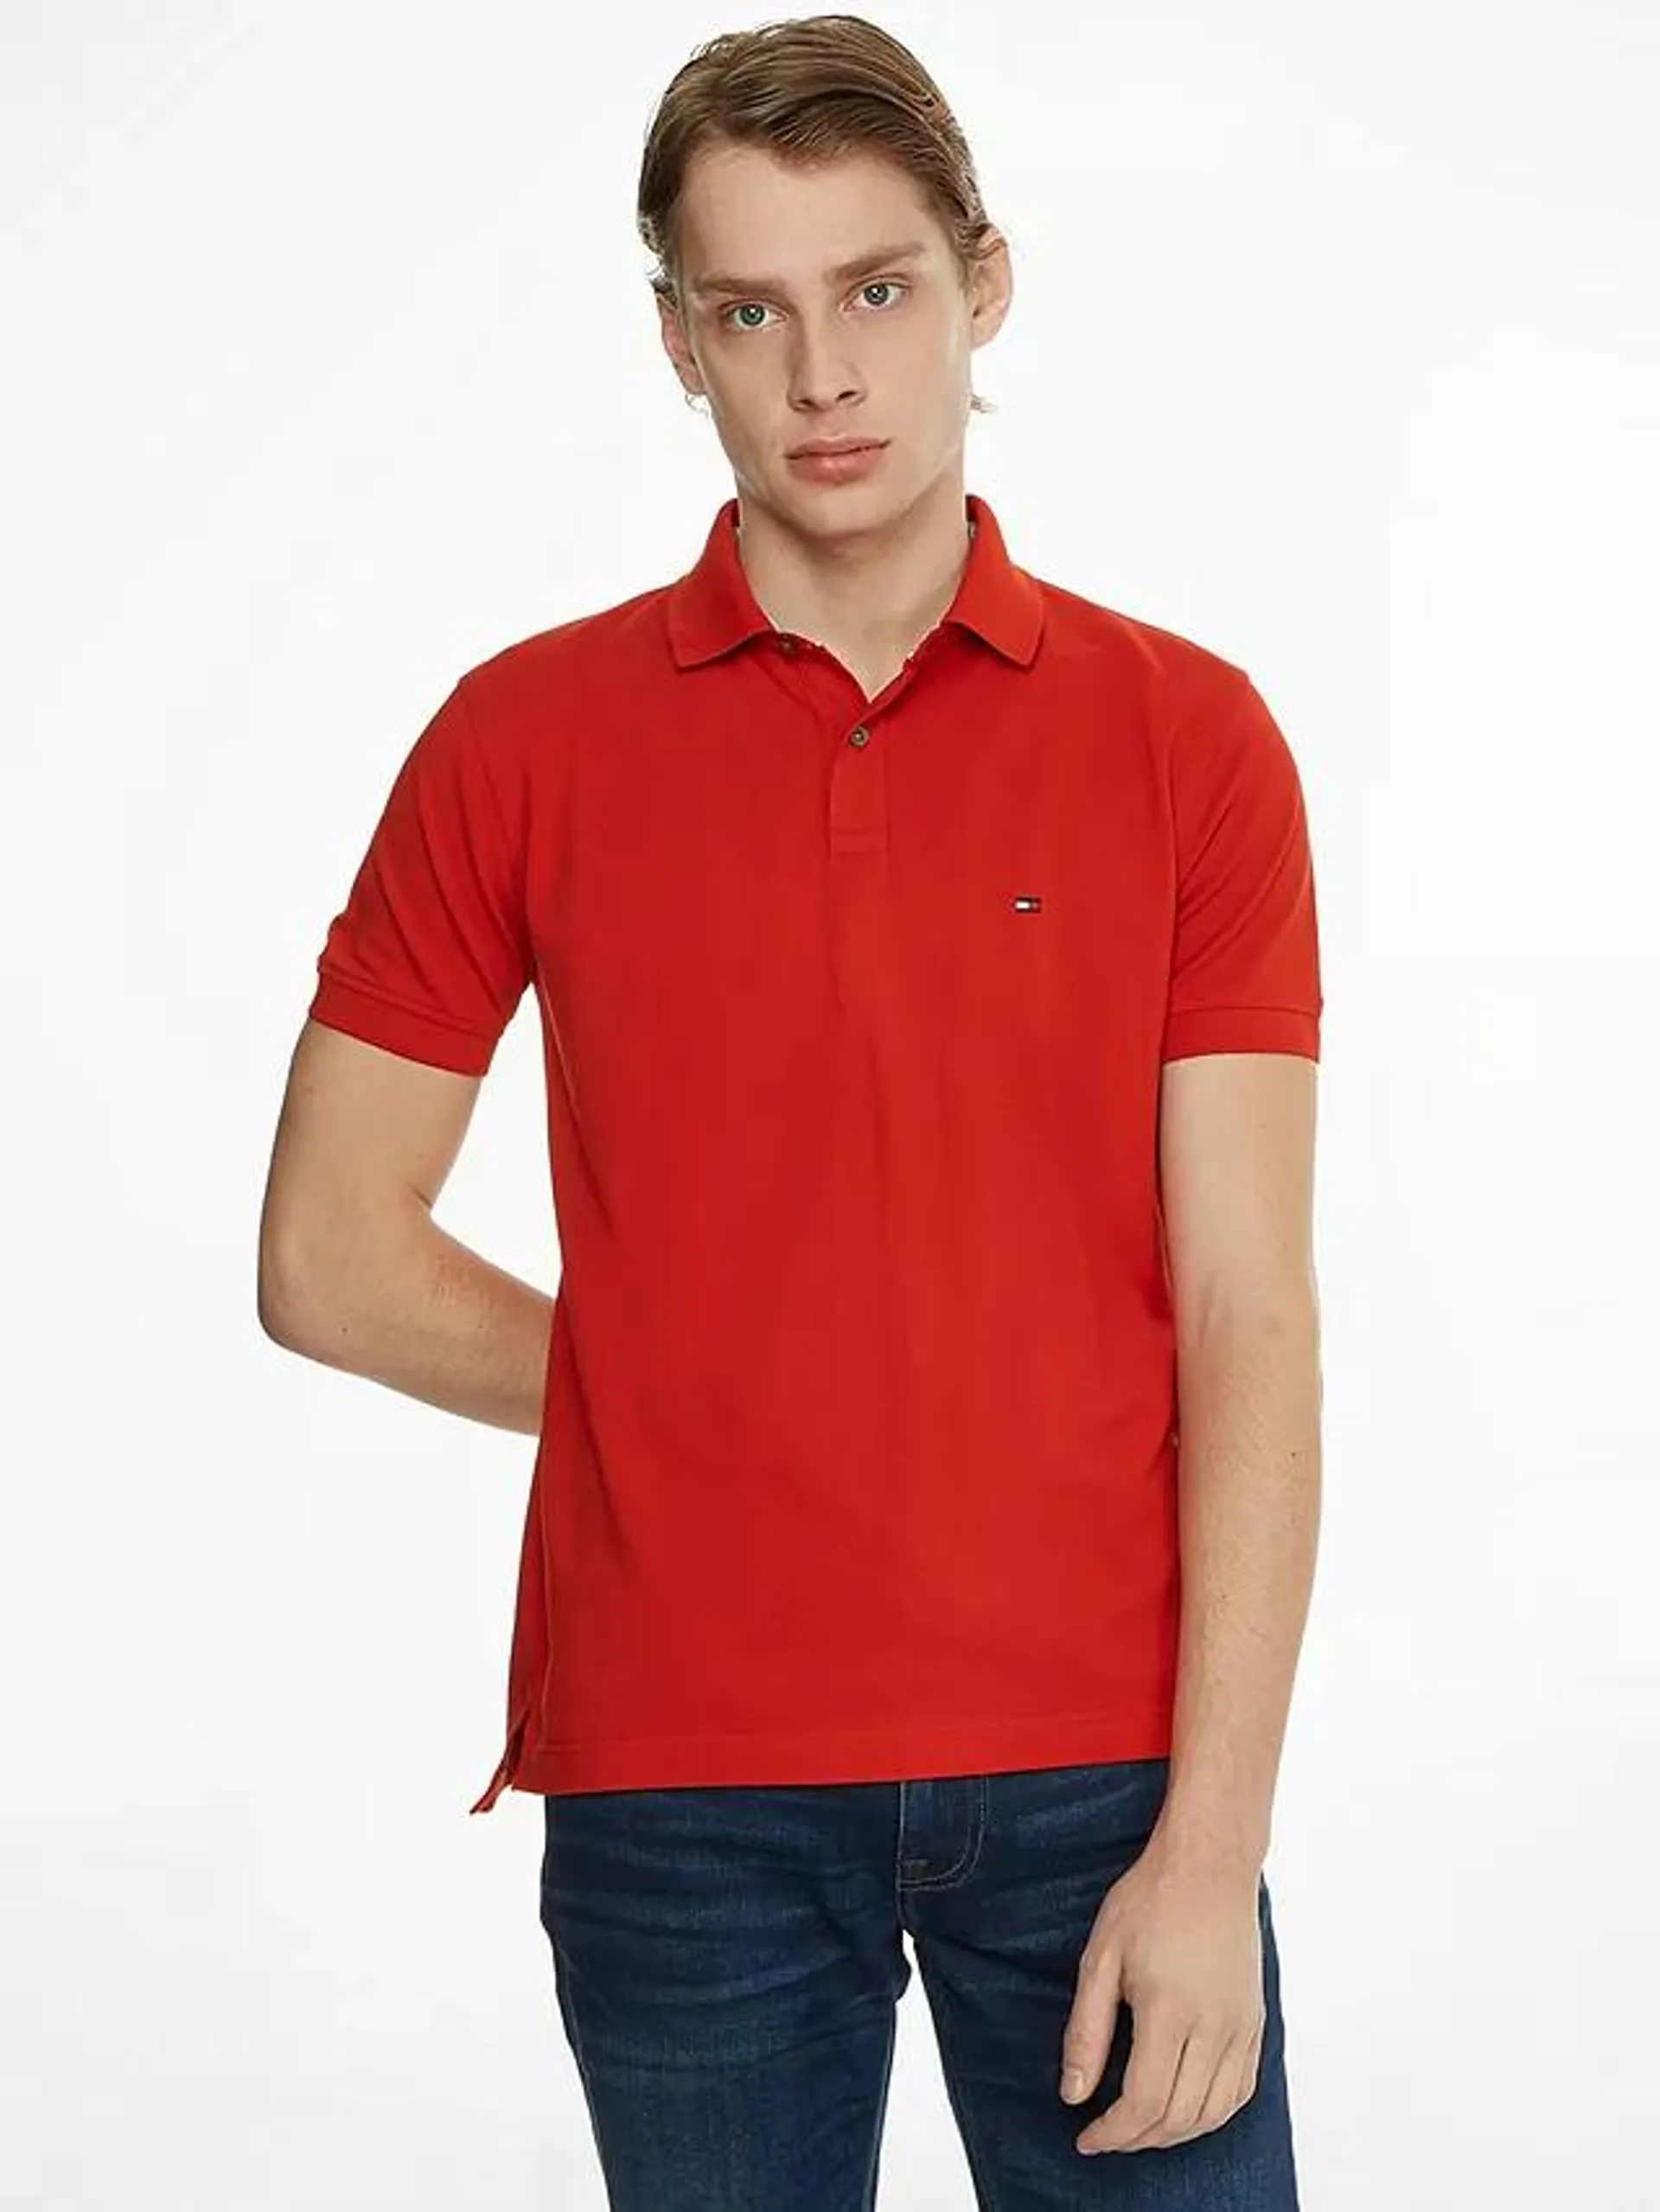 Tommy Hilfiger 1985 Regular Fit Polo Shirt, Empire Flame